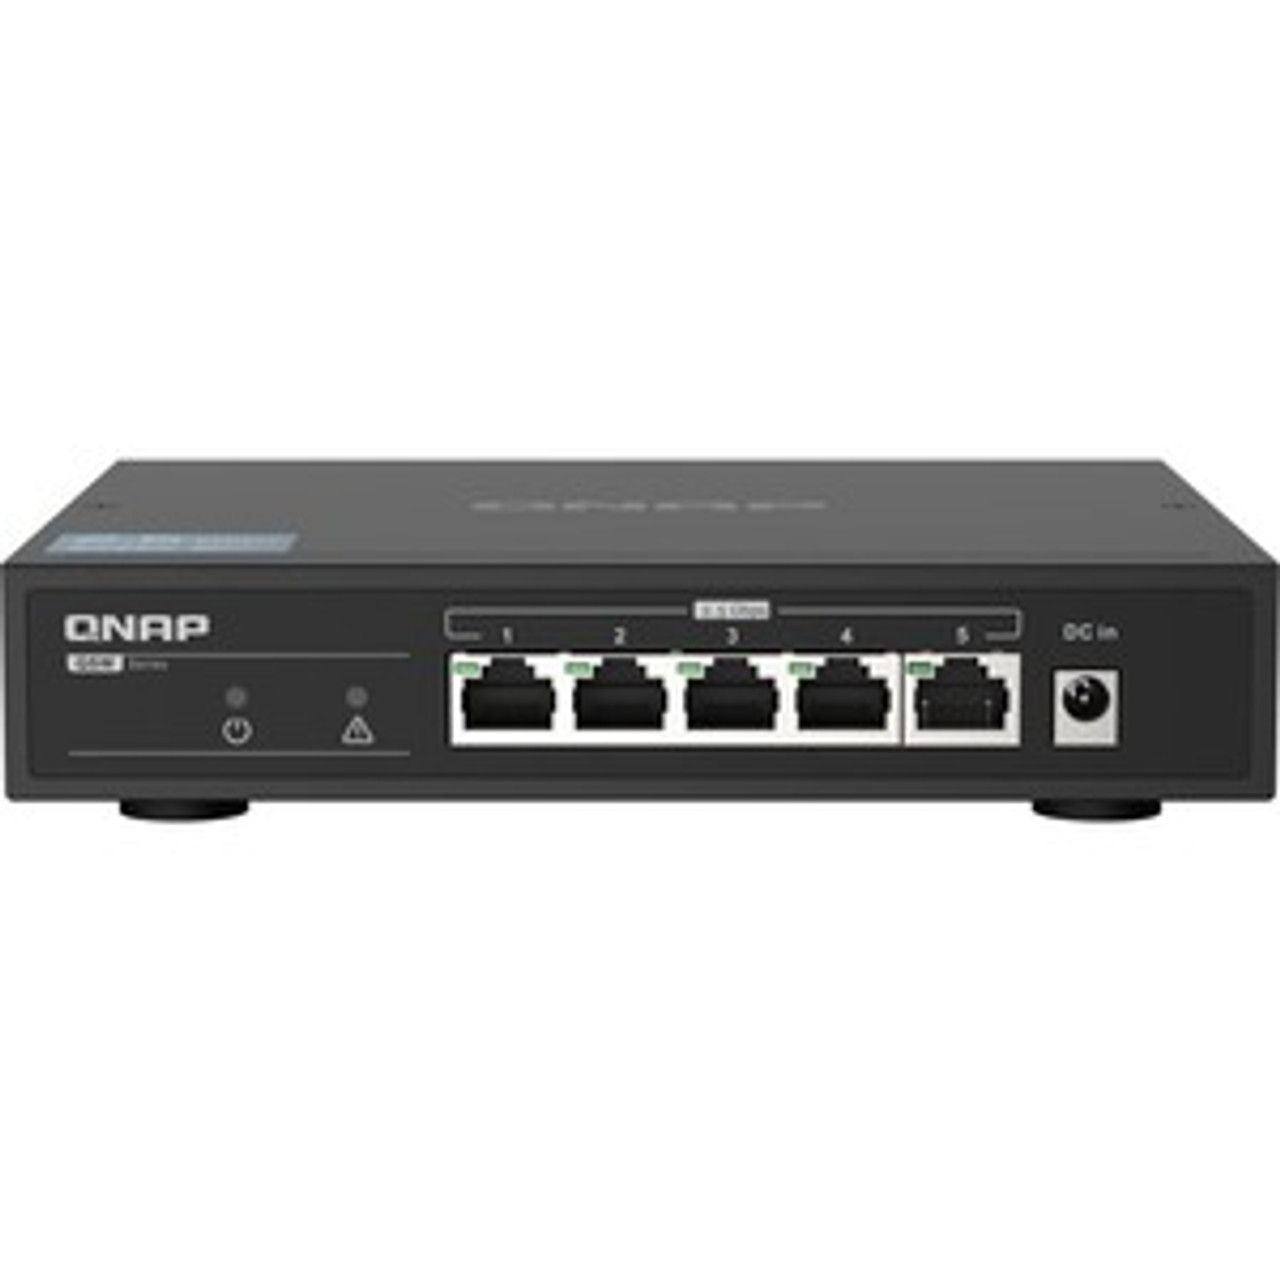 QSW-1105-5T QNAP QSW-1105-5T Ethernet Switch - 5 Ports - 2 Layer Supported - 12 W Power Consumption - Twisted Pair -  (Refurbished)